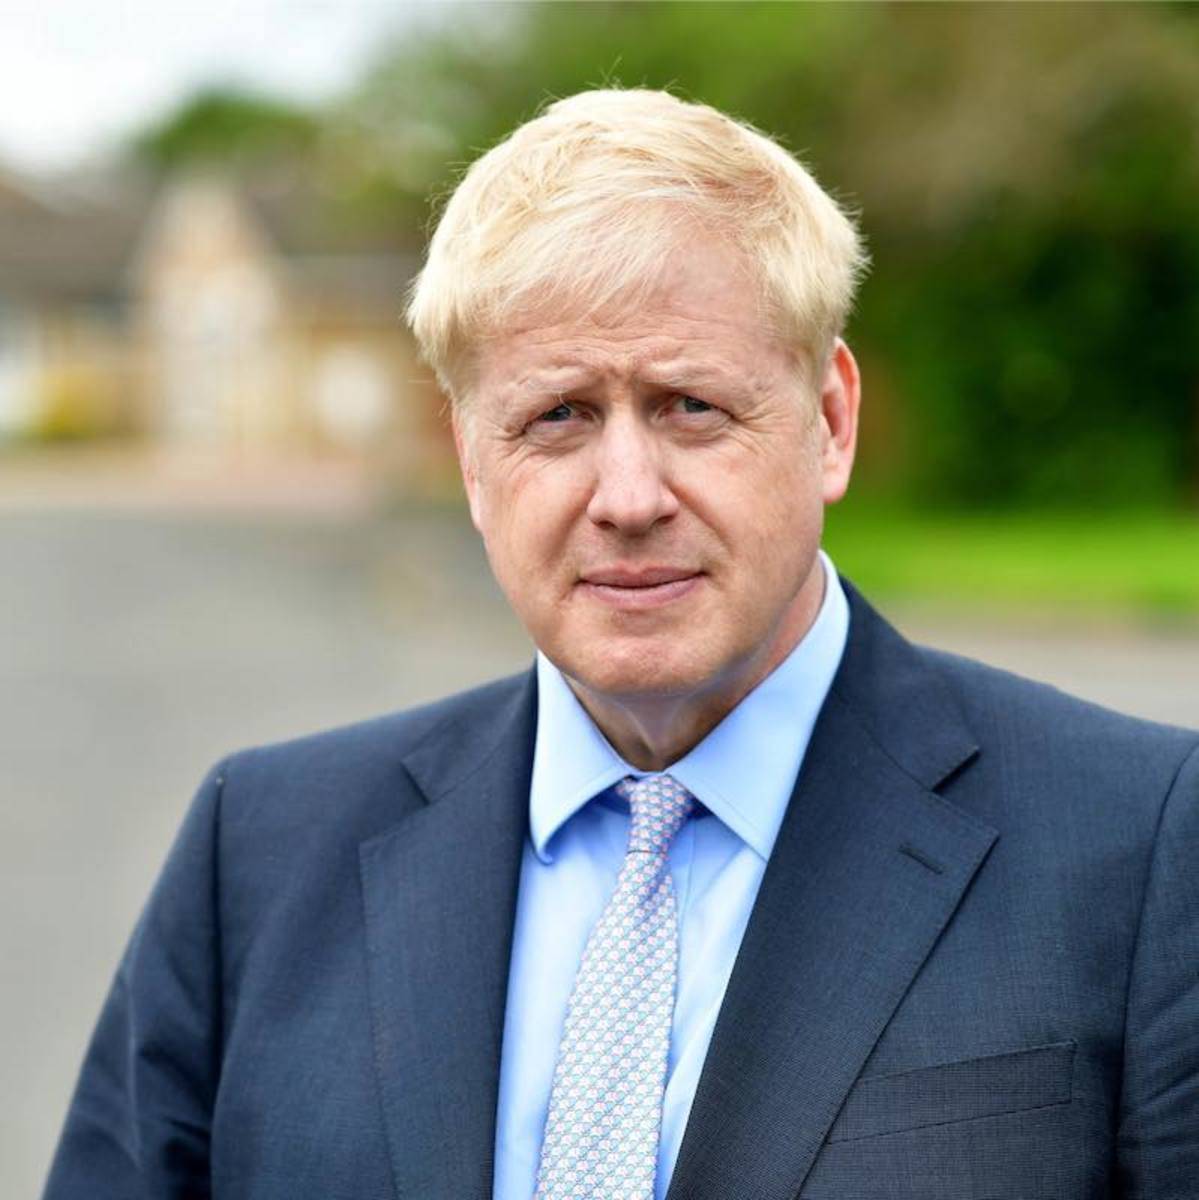 Boris: Joked About Rule of Six, Helps People, Avoid the In-Laws.